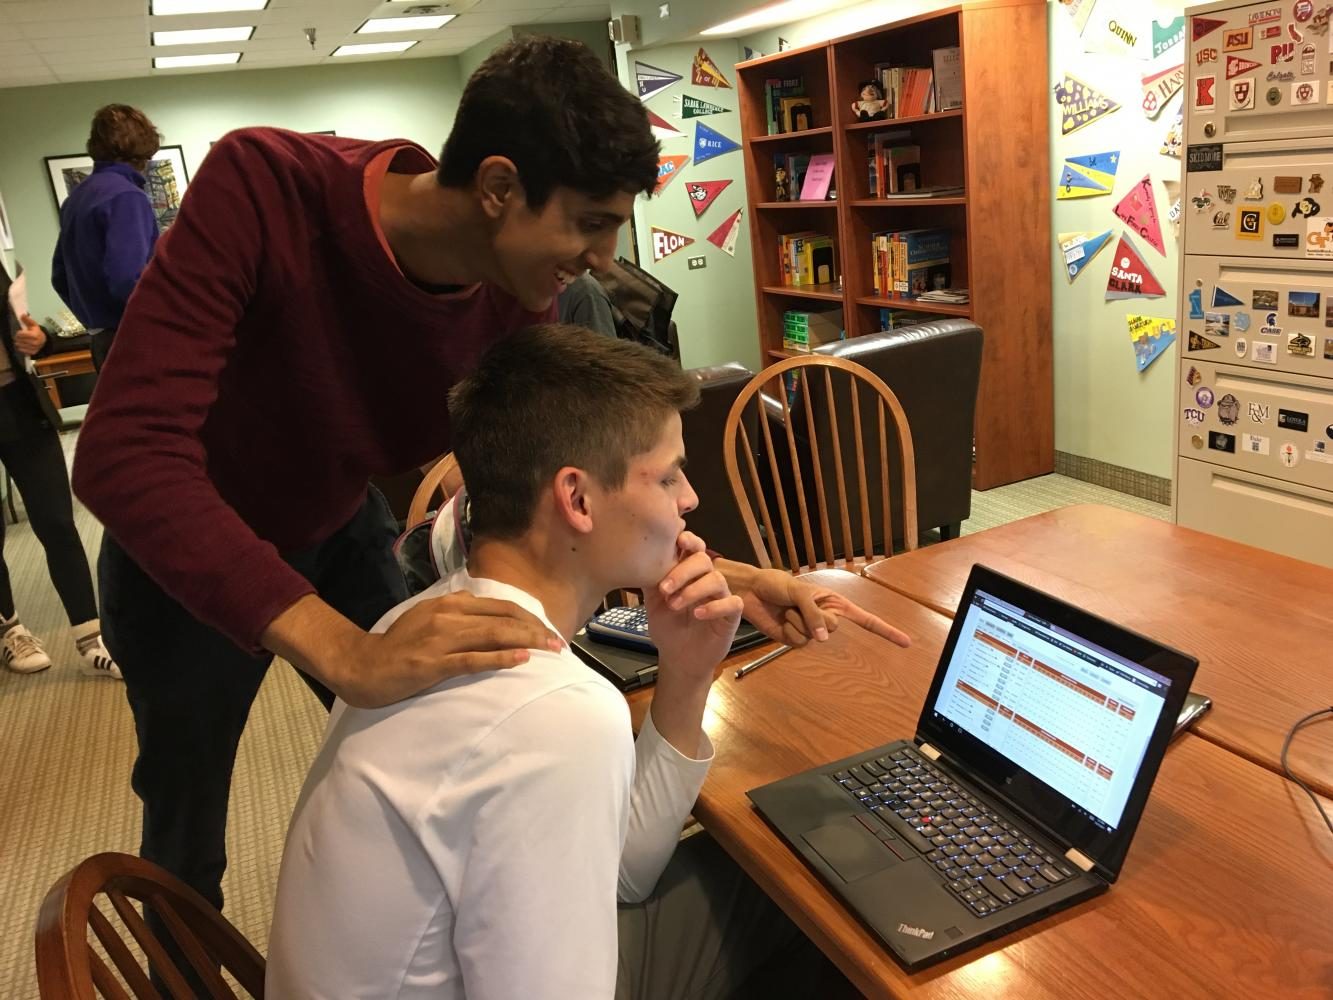 Seniors Rahul Dev and Gus Grunau study Grunaus fantasy basketball teams points for the week. “People say my team is bad when they hear the names. They aren’t big names, but on paper and with my managerial skills, I am feeling confident for this season,” Grunau said.